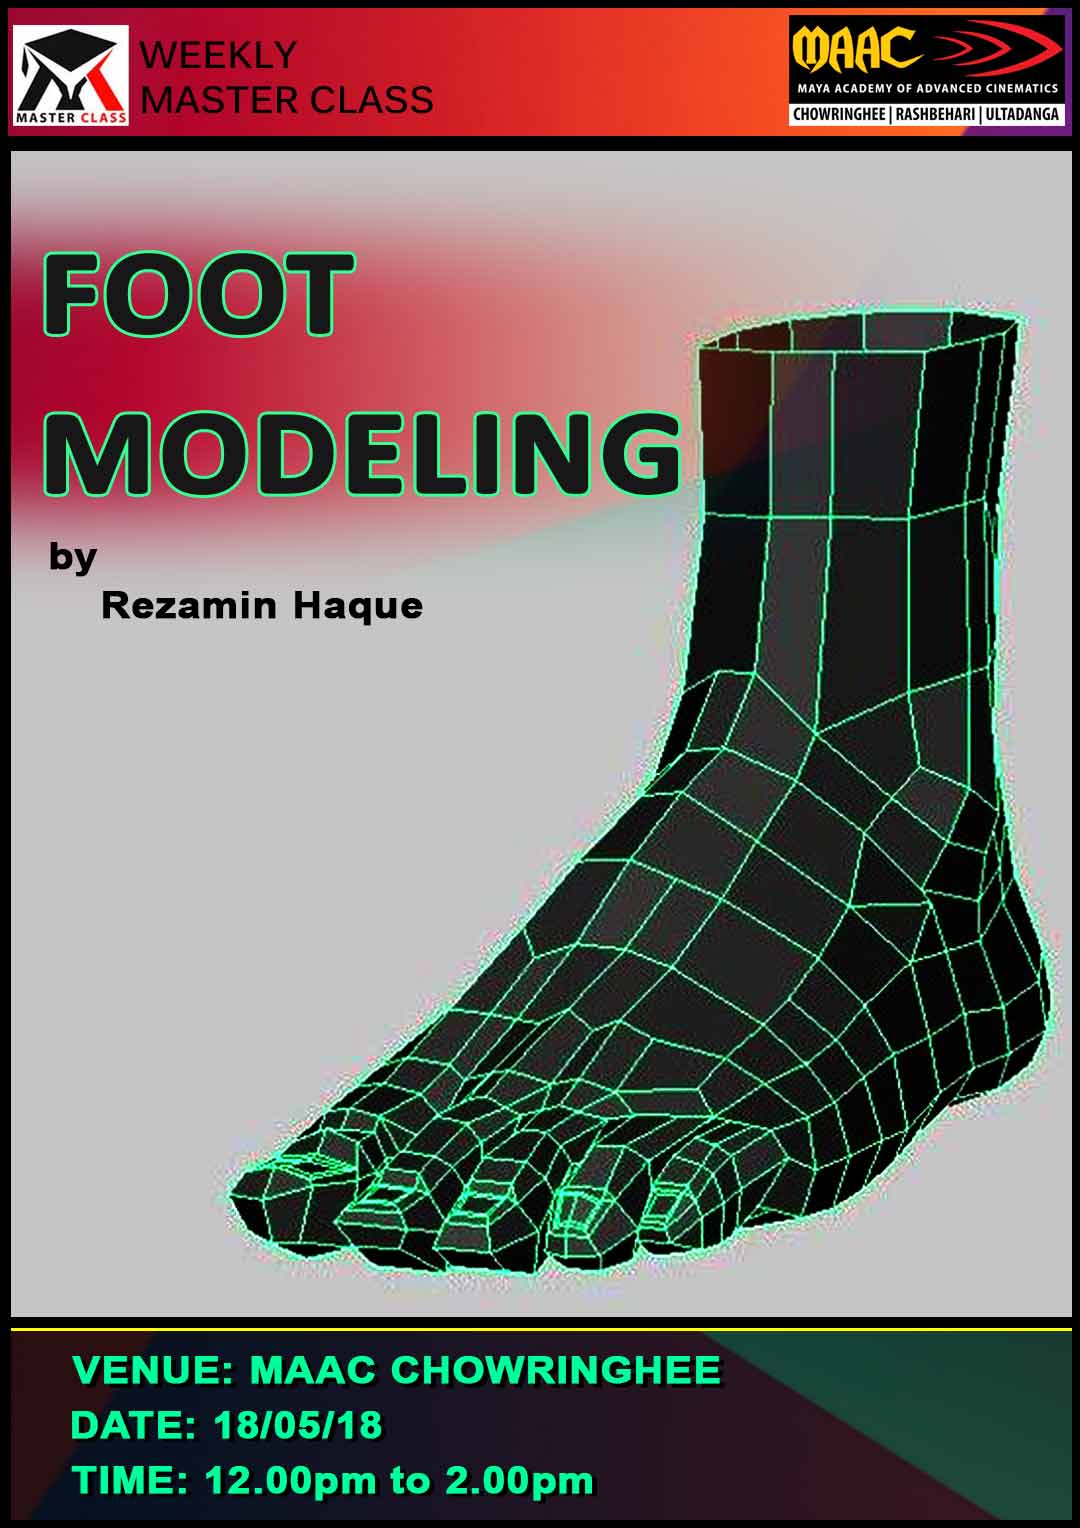 Weekly Master Class on Foot Modeling